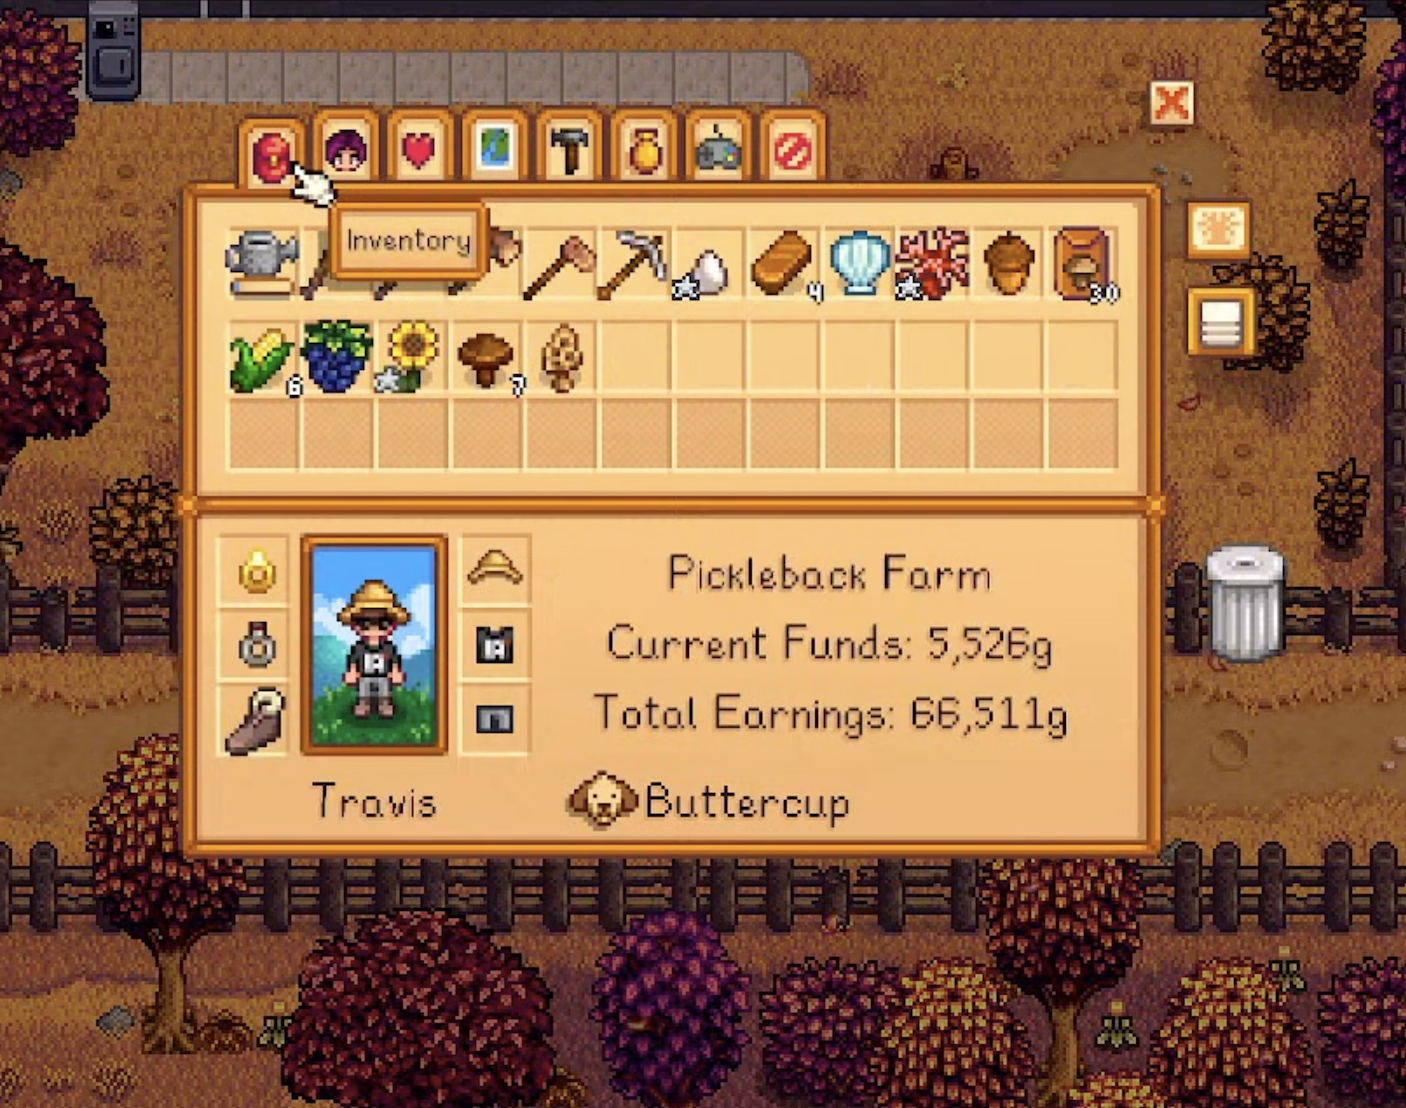 The menu for the game Stardew Valley. There are 8 tabs up top, and Travis’ inventory is displayed below them. At the bottom left we see a depiction of Travis’ character, named Travis, and on the right is the text “Pickleback Farm current earnings 5,526g total earnings 66,511g”. At the very bottom we see the face of a yellow dog named Buttercup. Behind the menu are autumn trees and leaves.